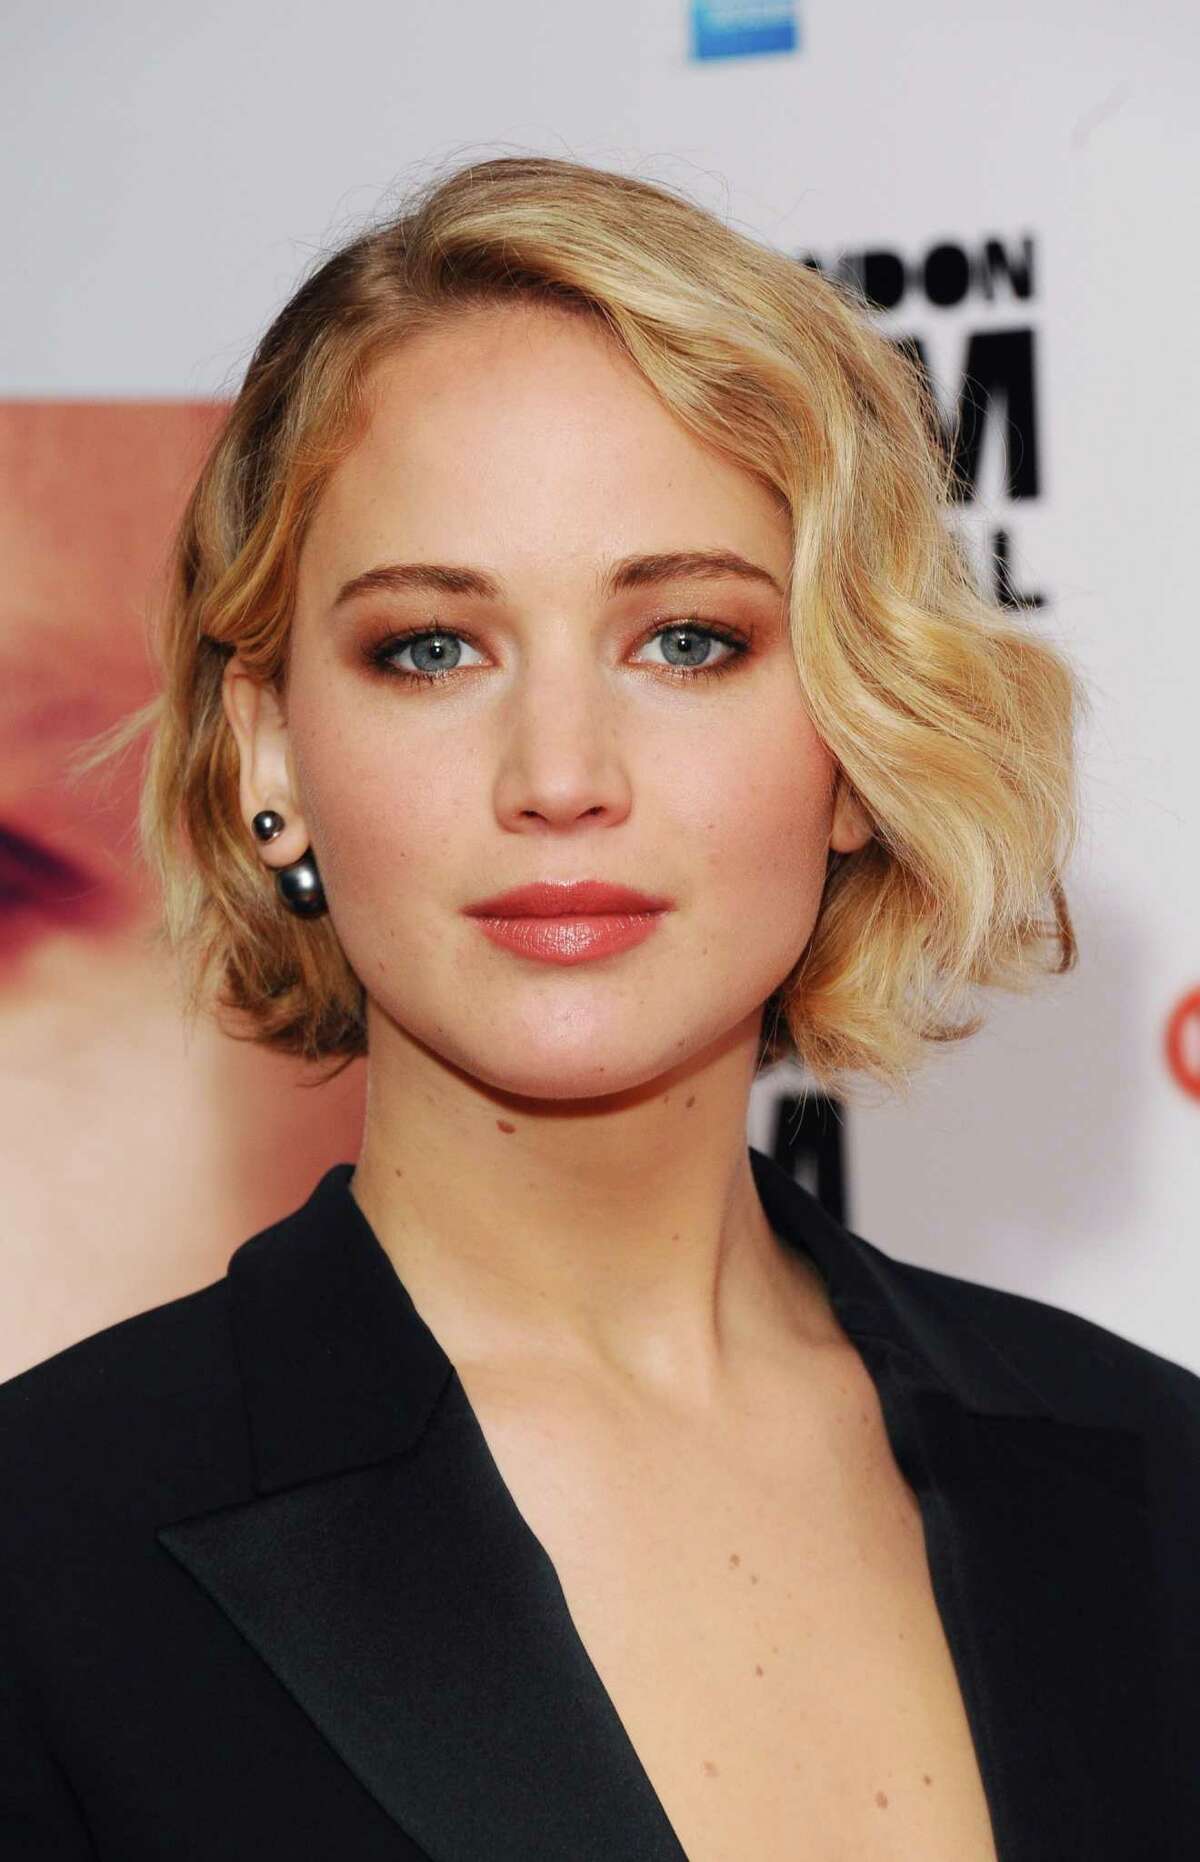 Jennifer Lawrence attends the premiere for "Serena" during the 58th BFI London Film Festival at Vue West End on October 13, 2014 in London, England.